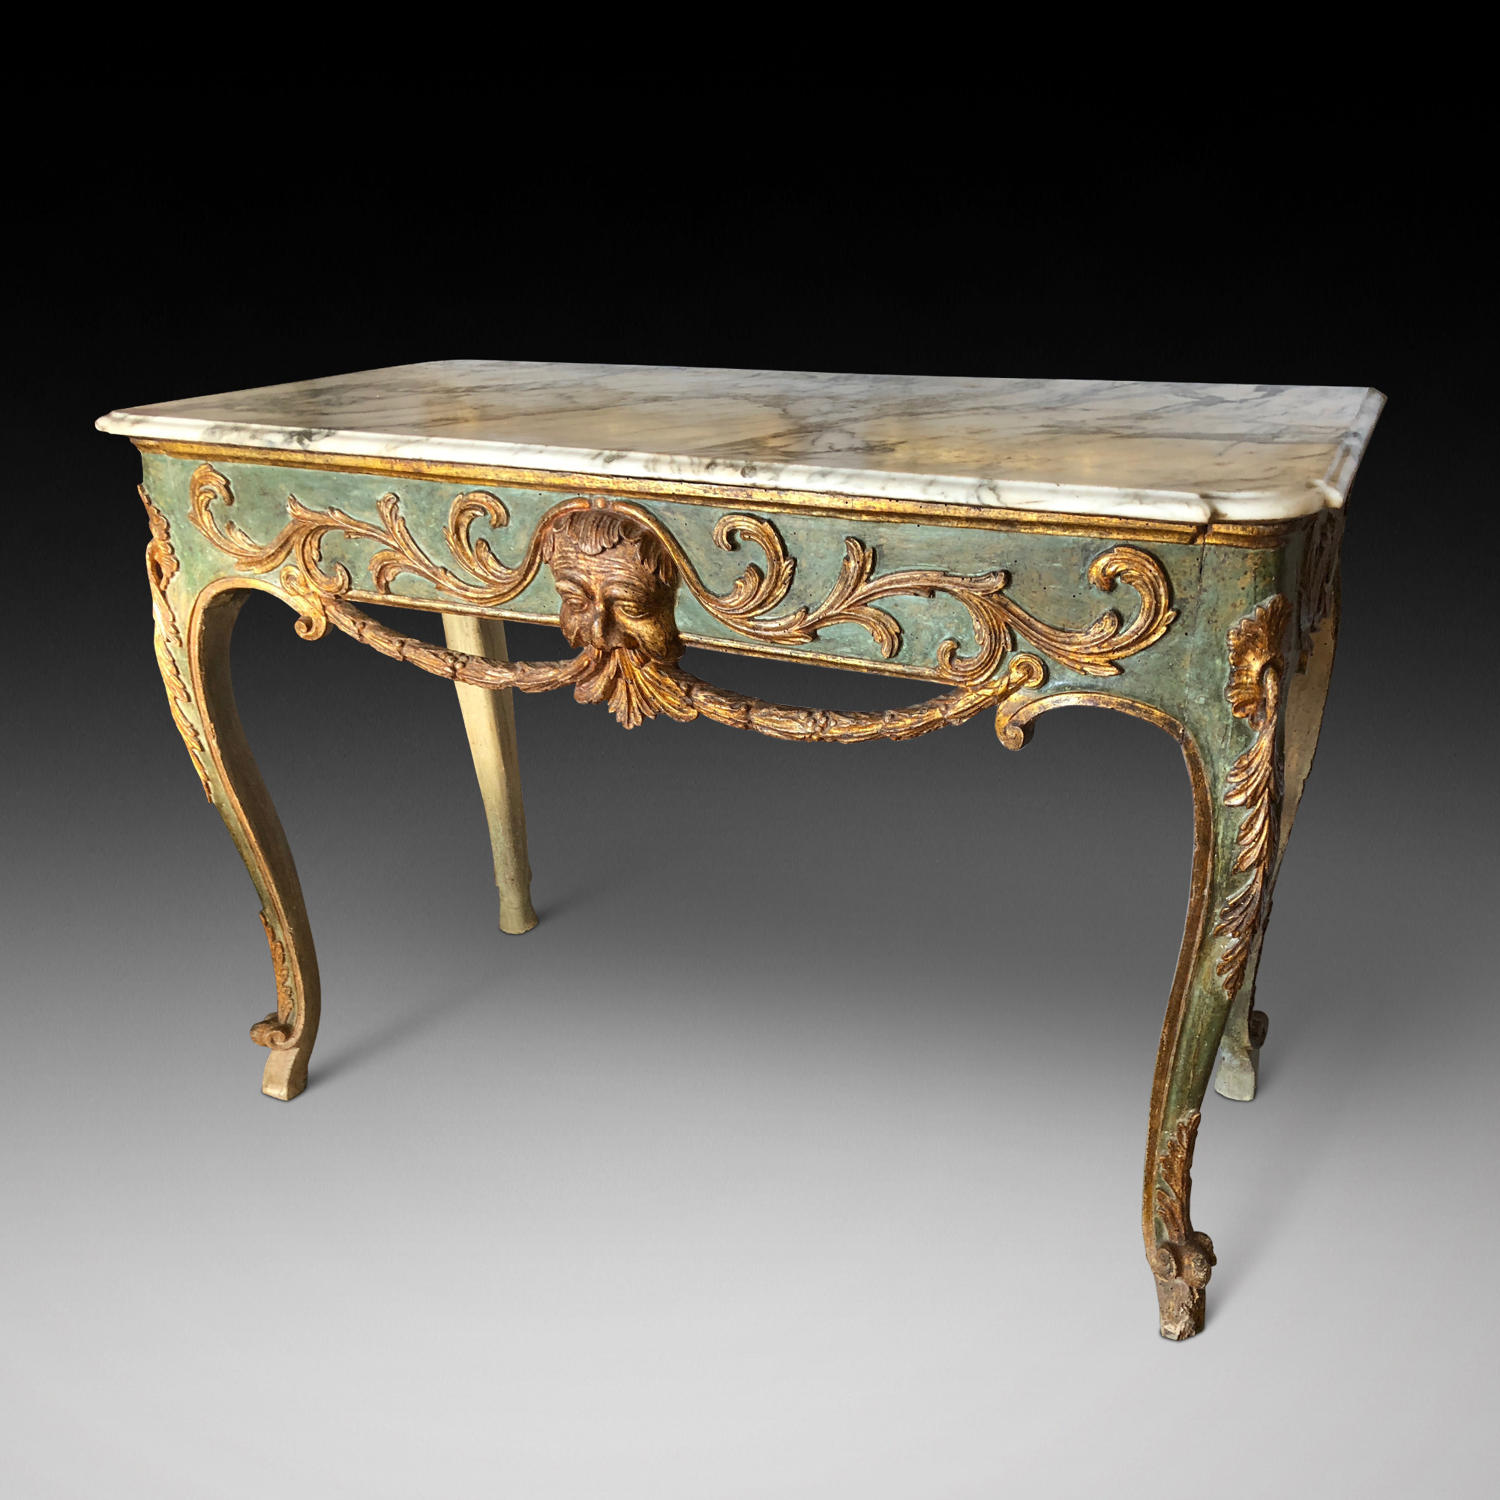 A MID 18TH CENTURY  ITALIAN DECORATED CONSOLE TABLE